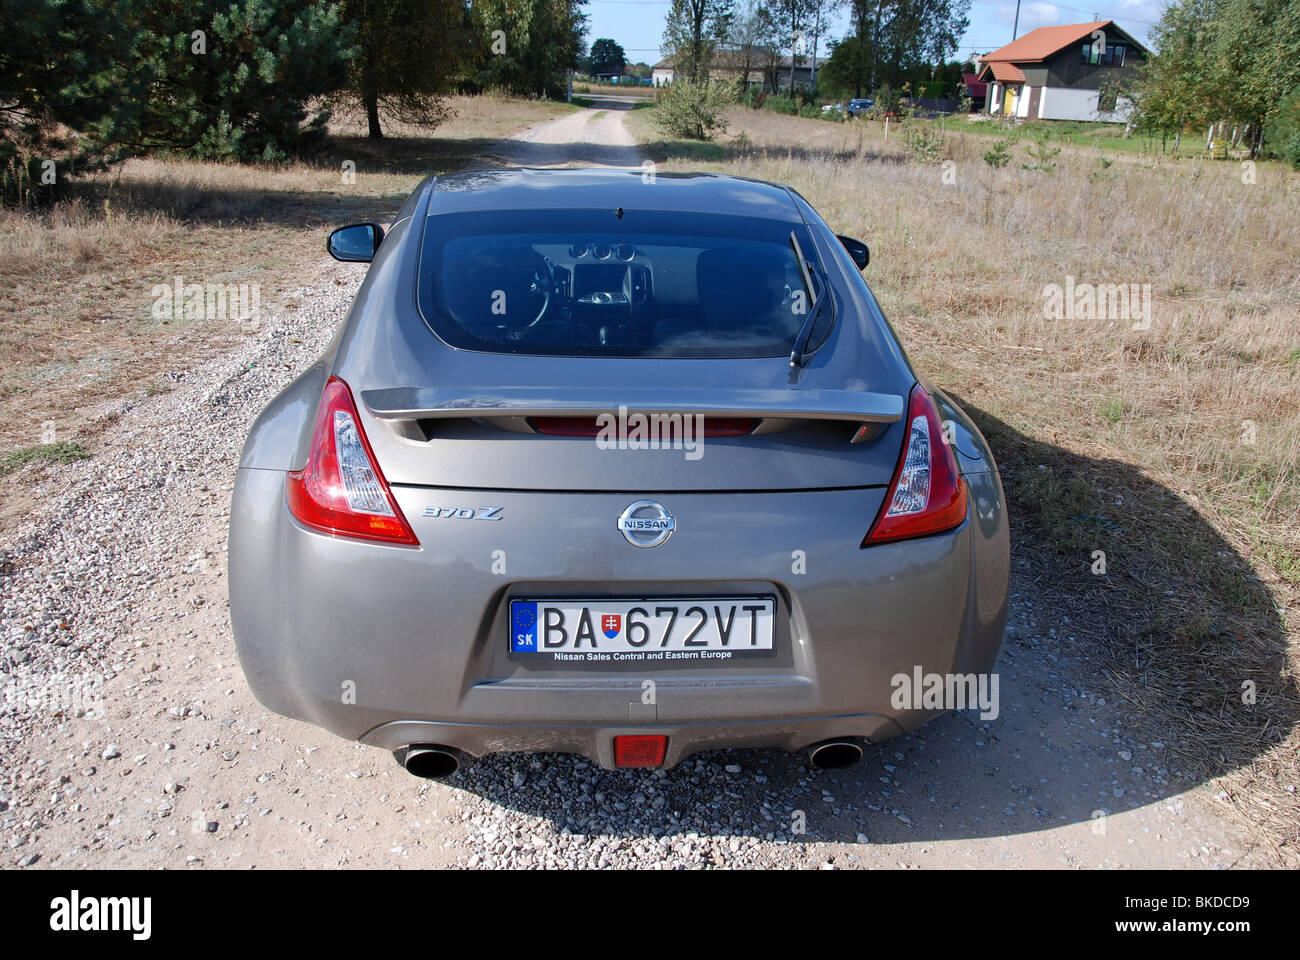 Nissan 370Z - 2009 - gray metallic - two doors (2D) - Japan popular sports coupe - on gravel road Stock Photo